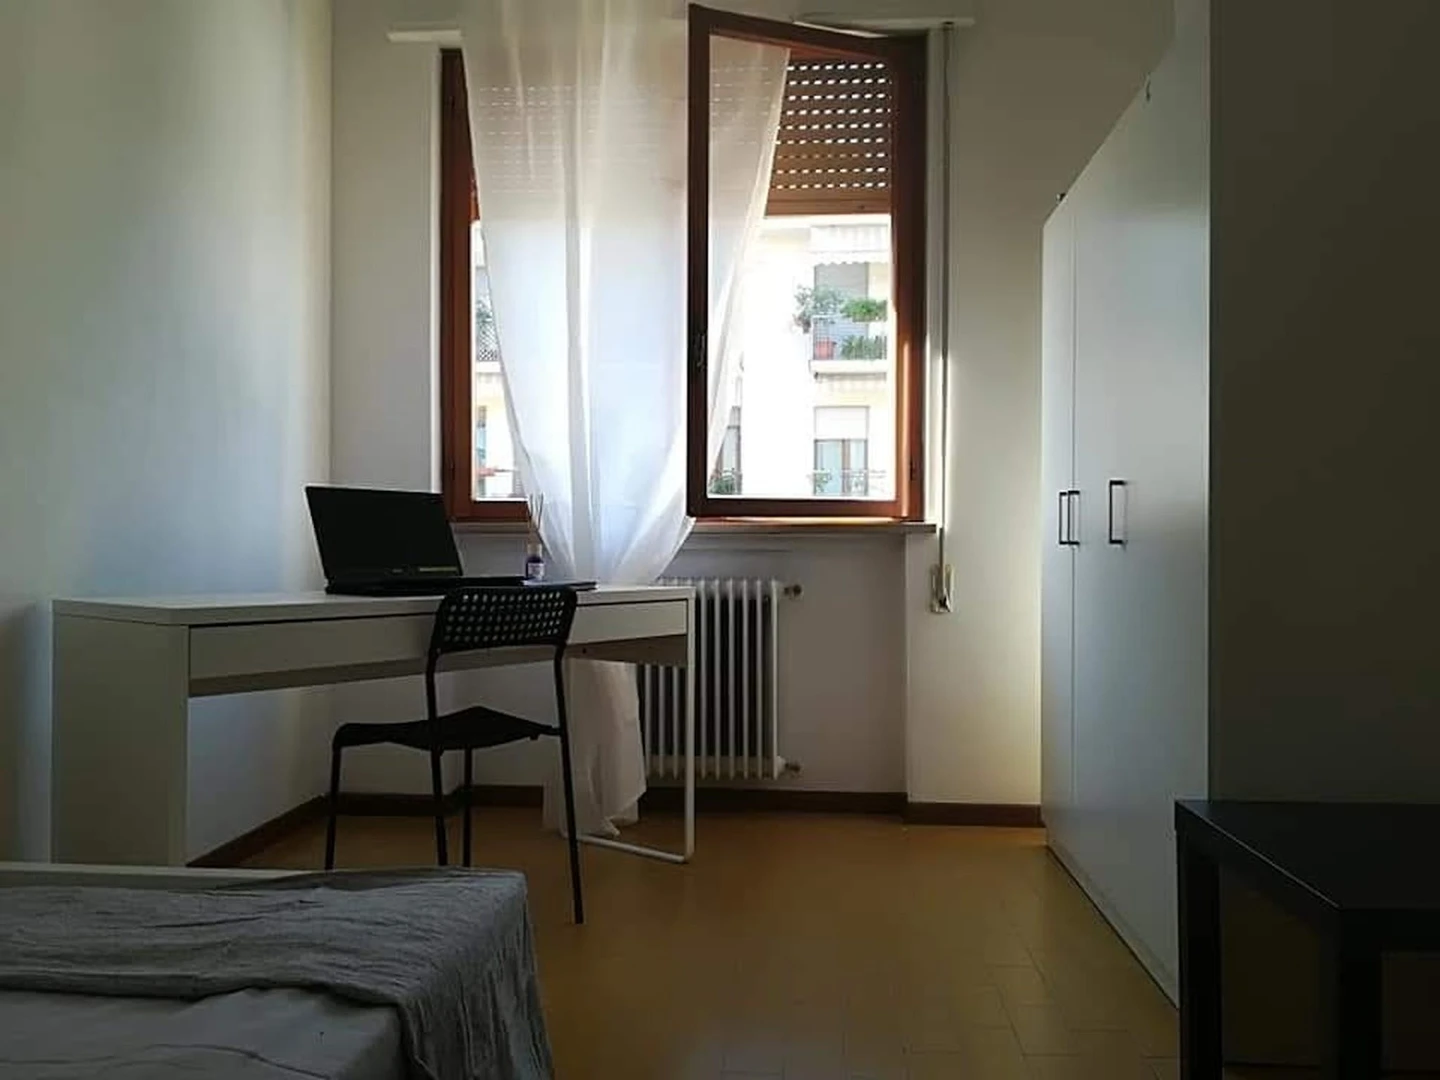 Room for rent in a shared flat in Vicenza